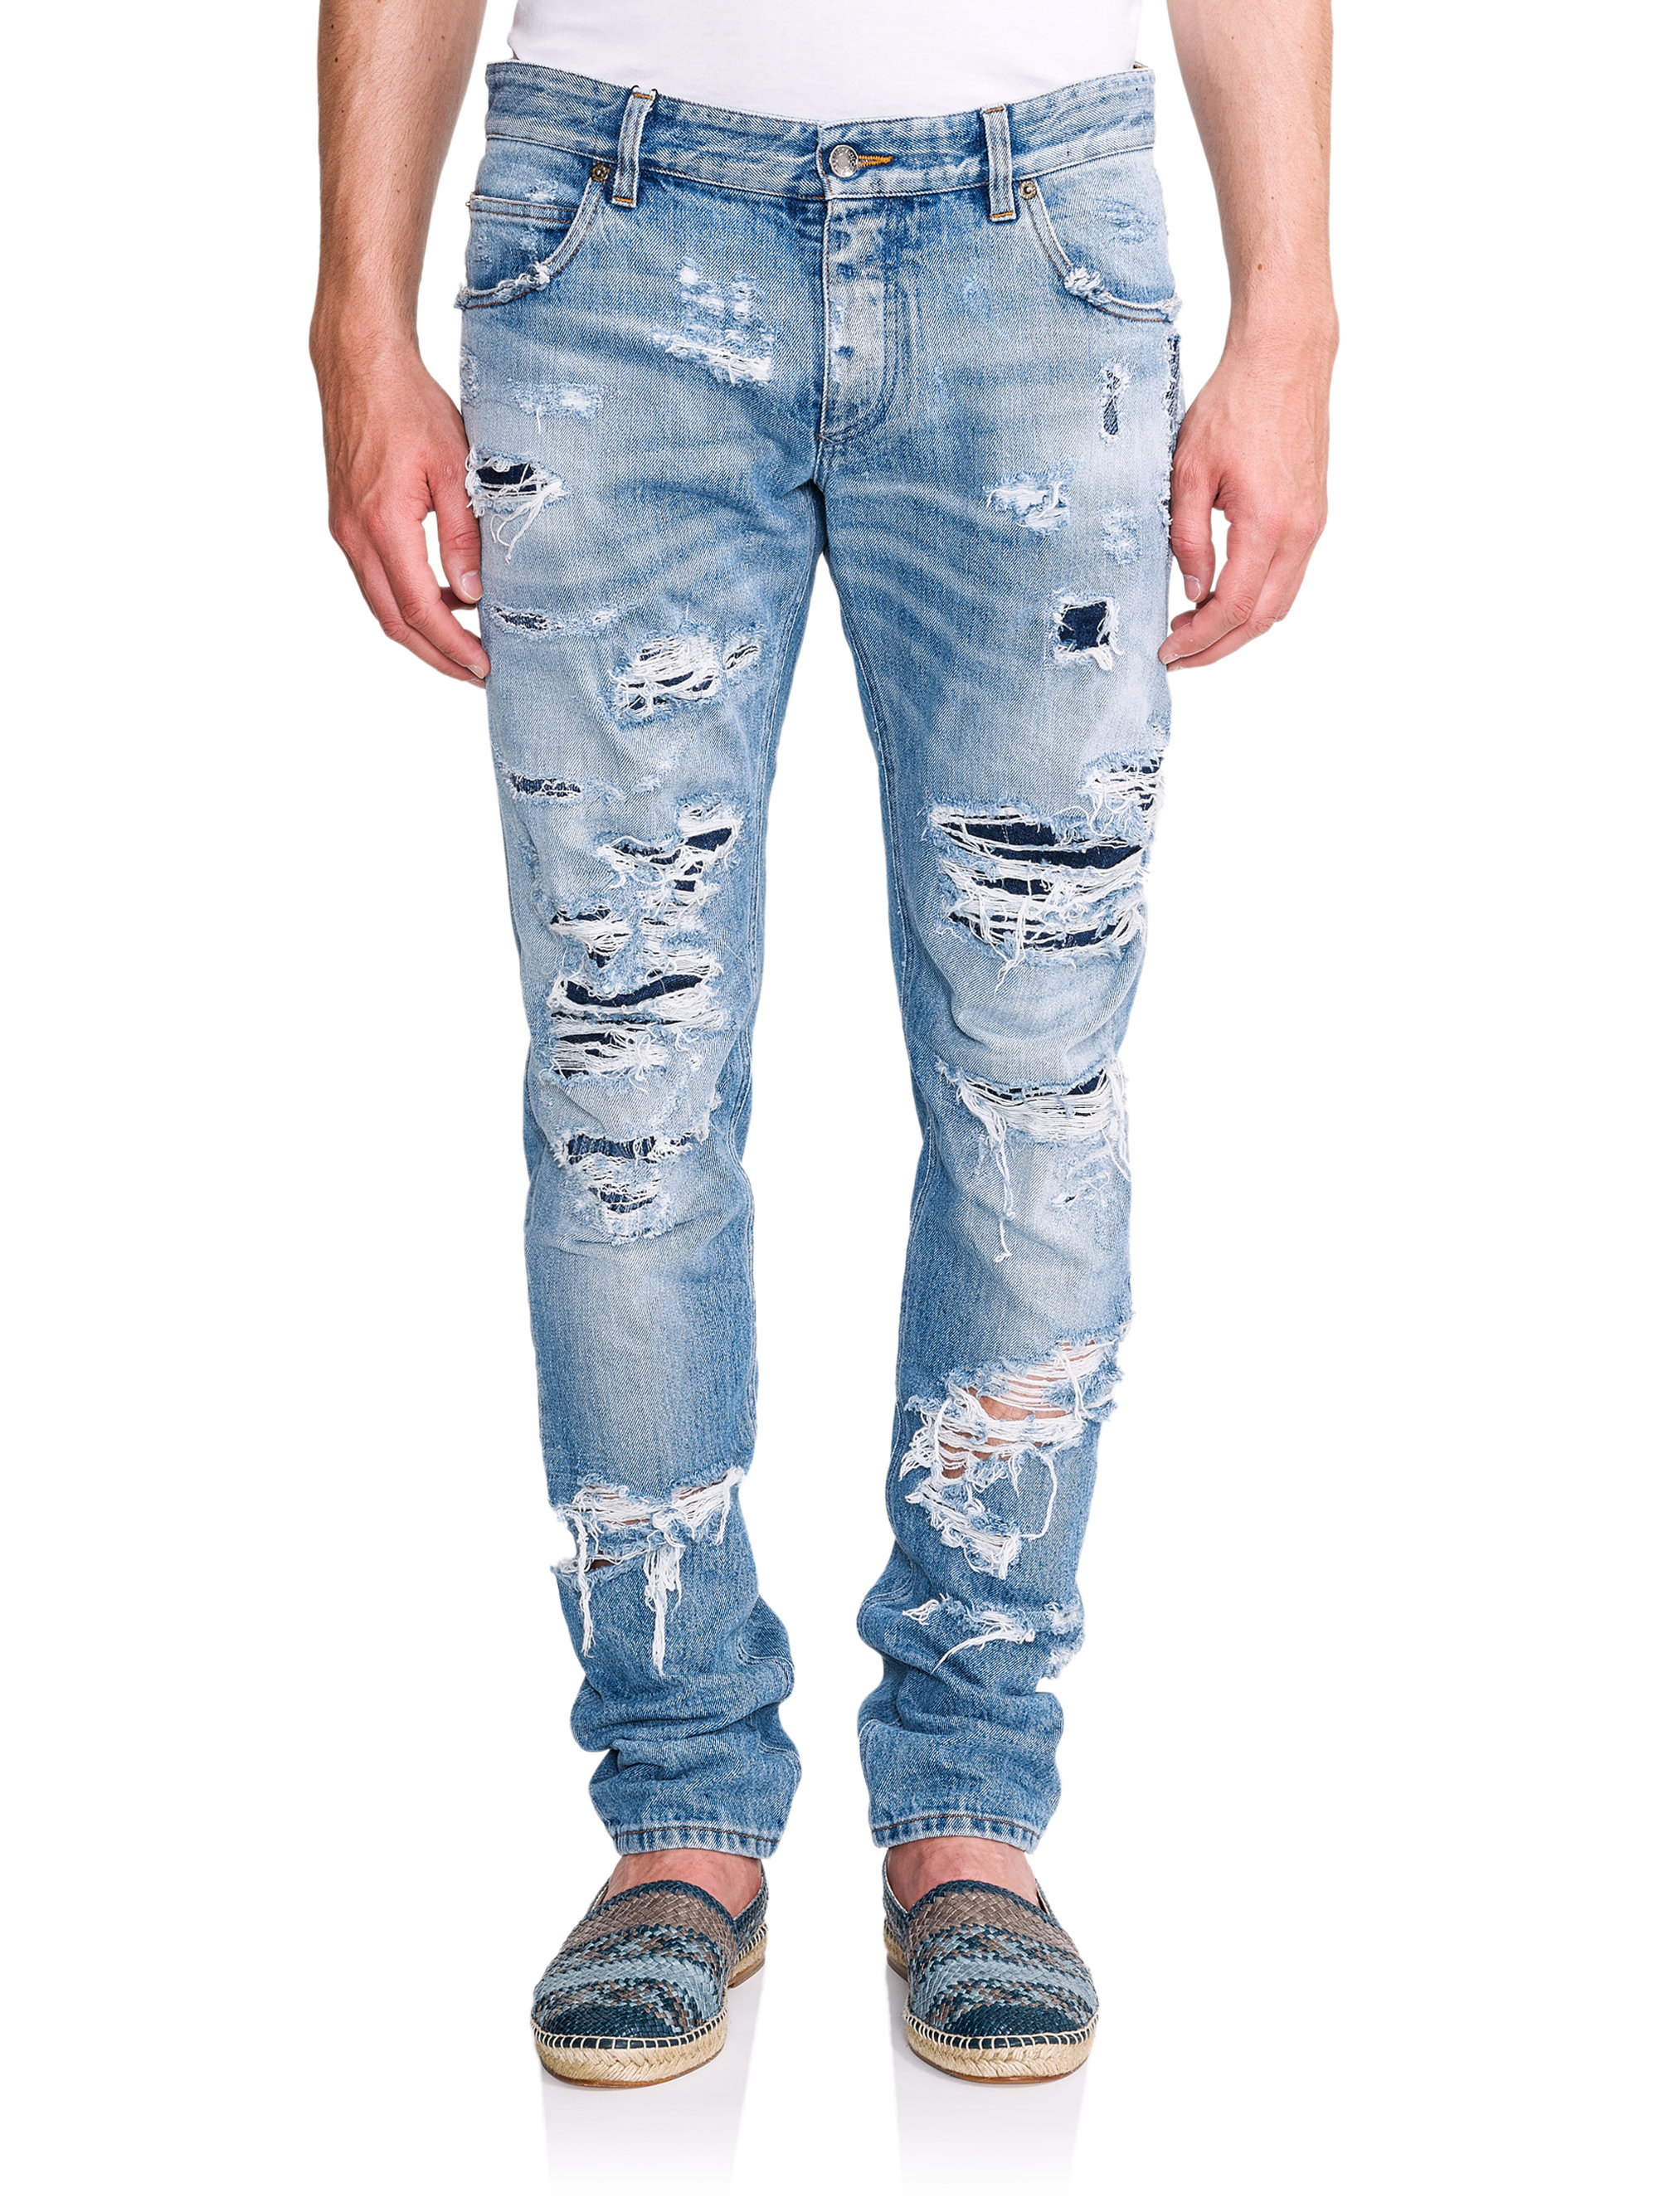 dolce gabbana ripped jeans